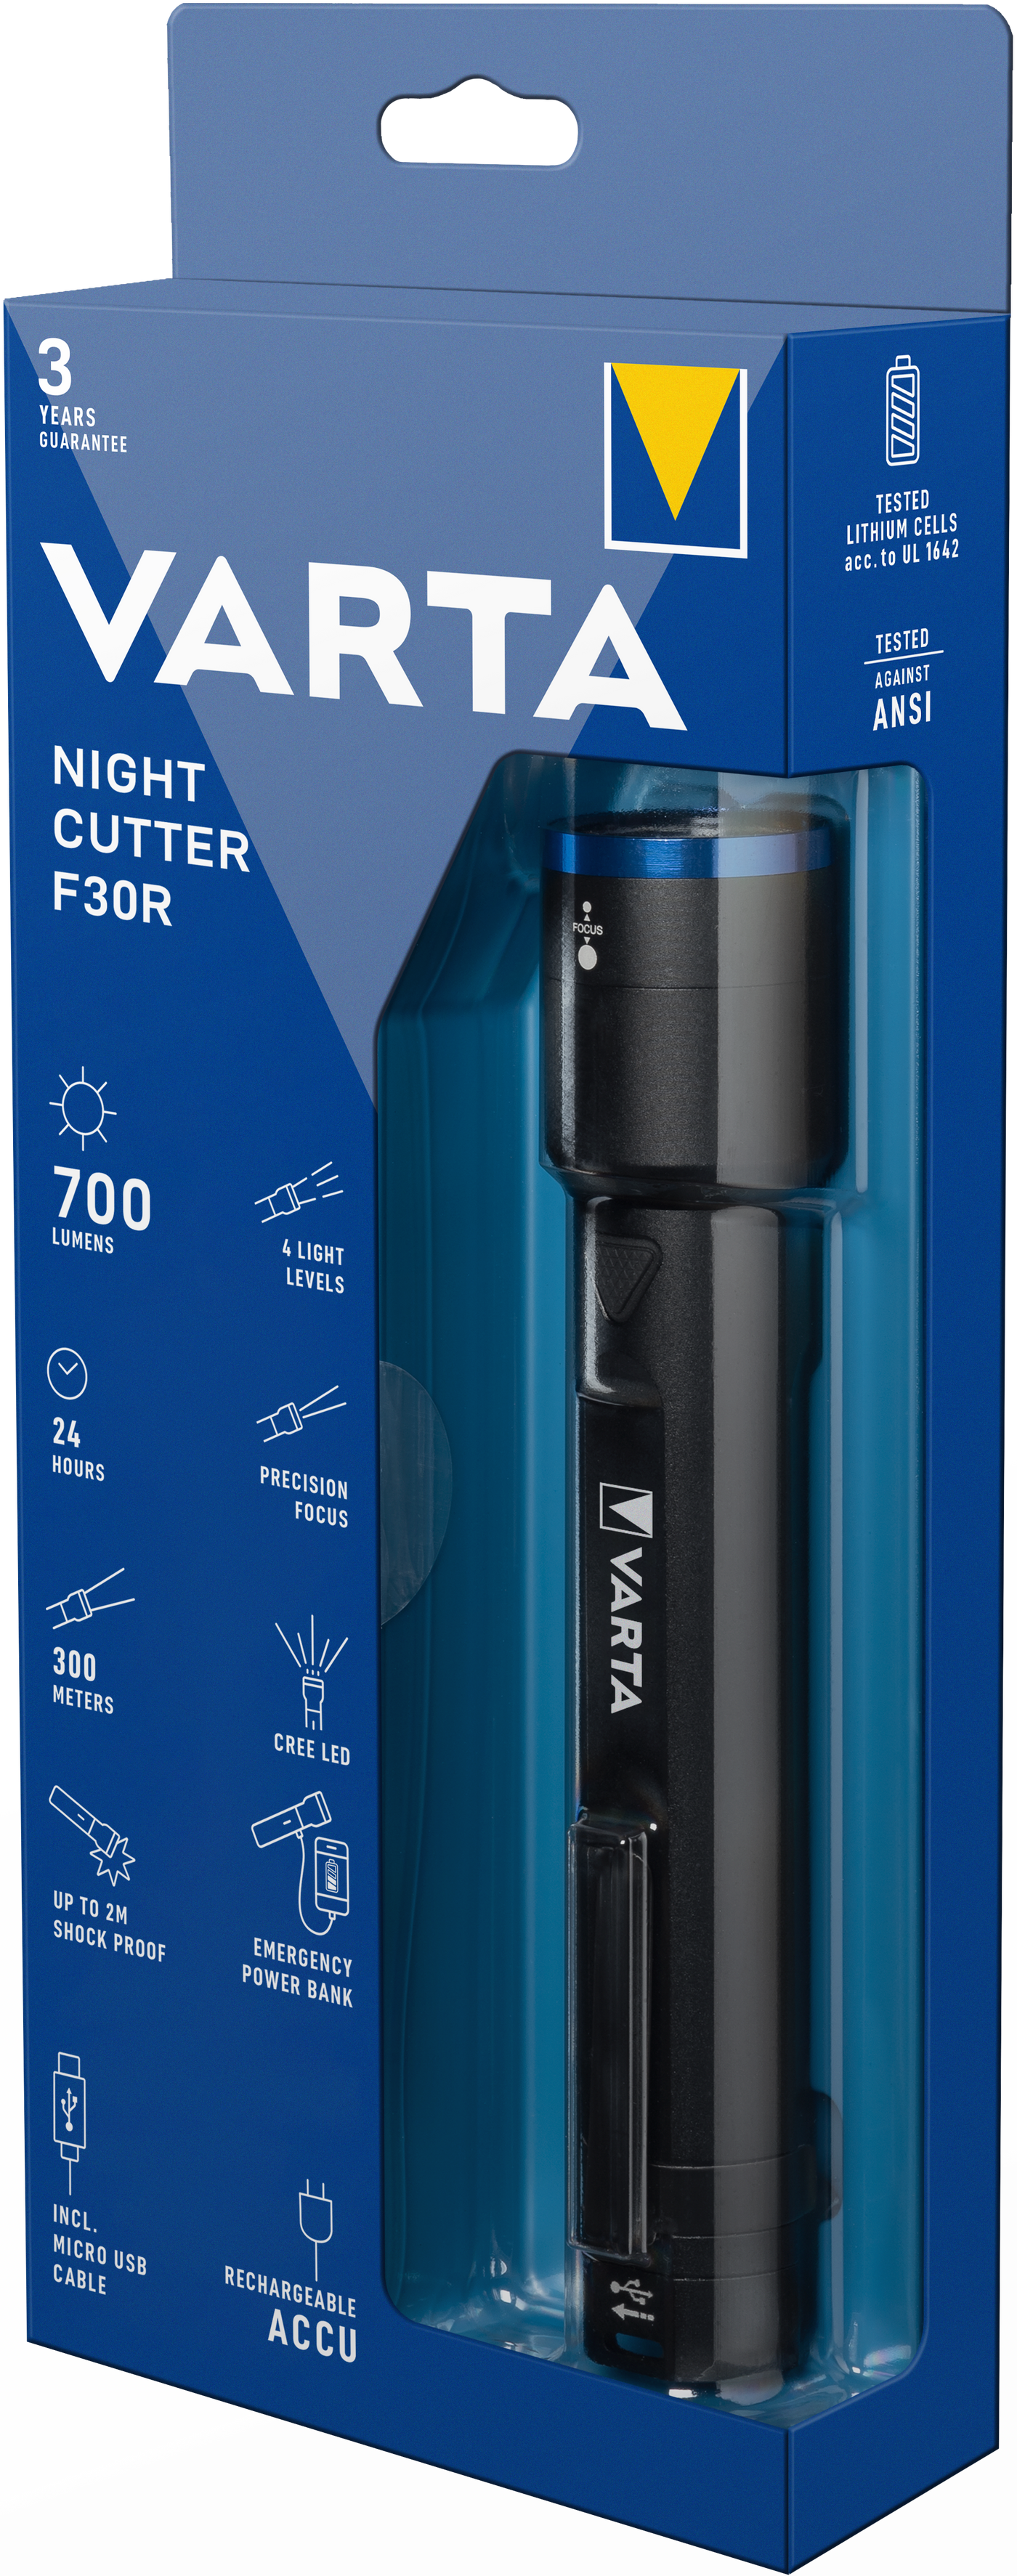 Varta 18901 Night Cutter F30R Rechargeable